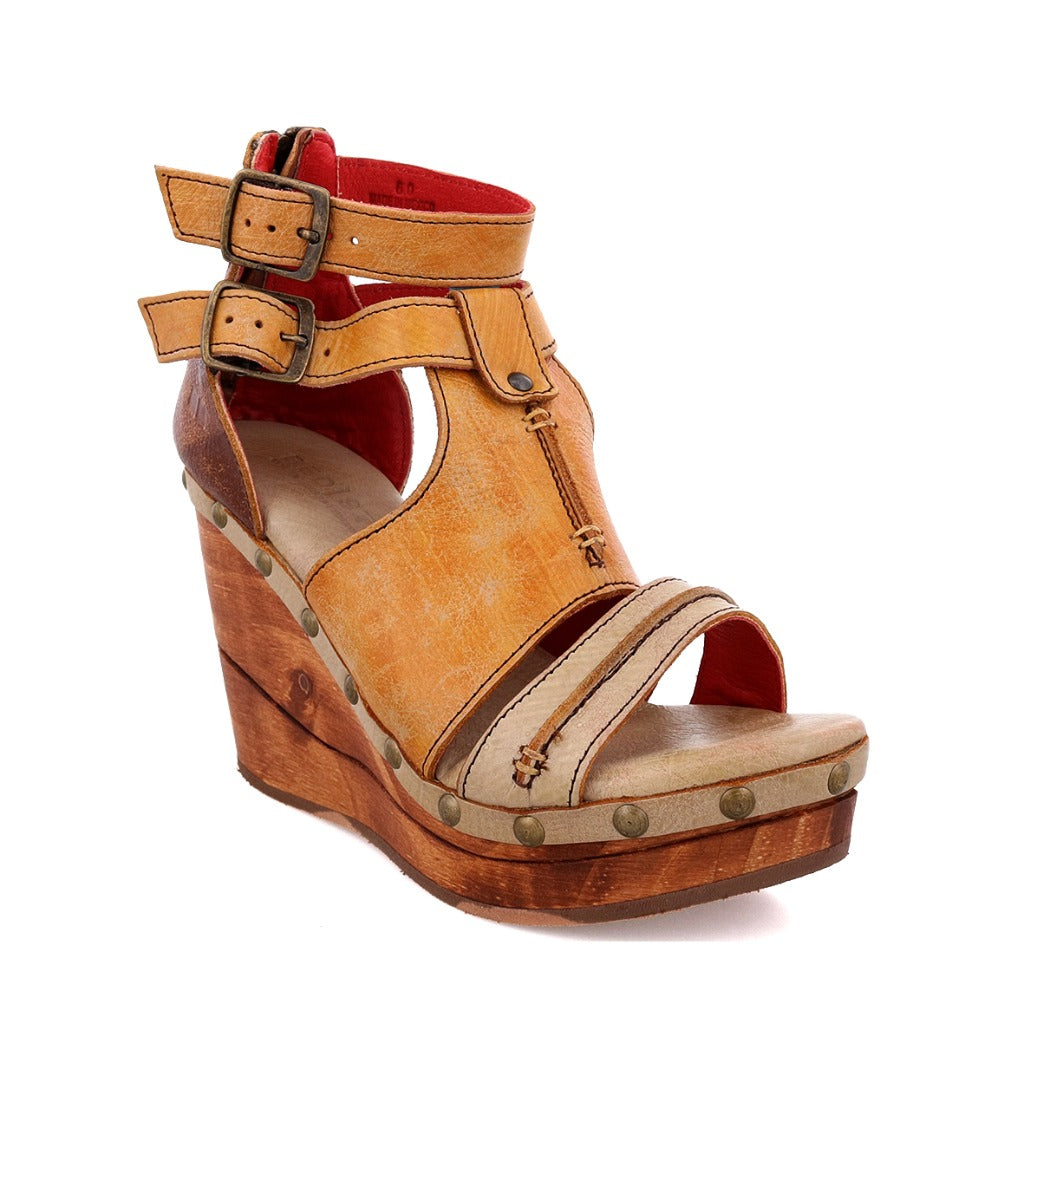 A women's wedge sandal with straps and buckles called the Princess by Bed Stu.